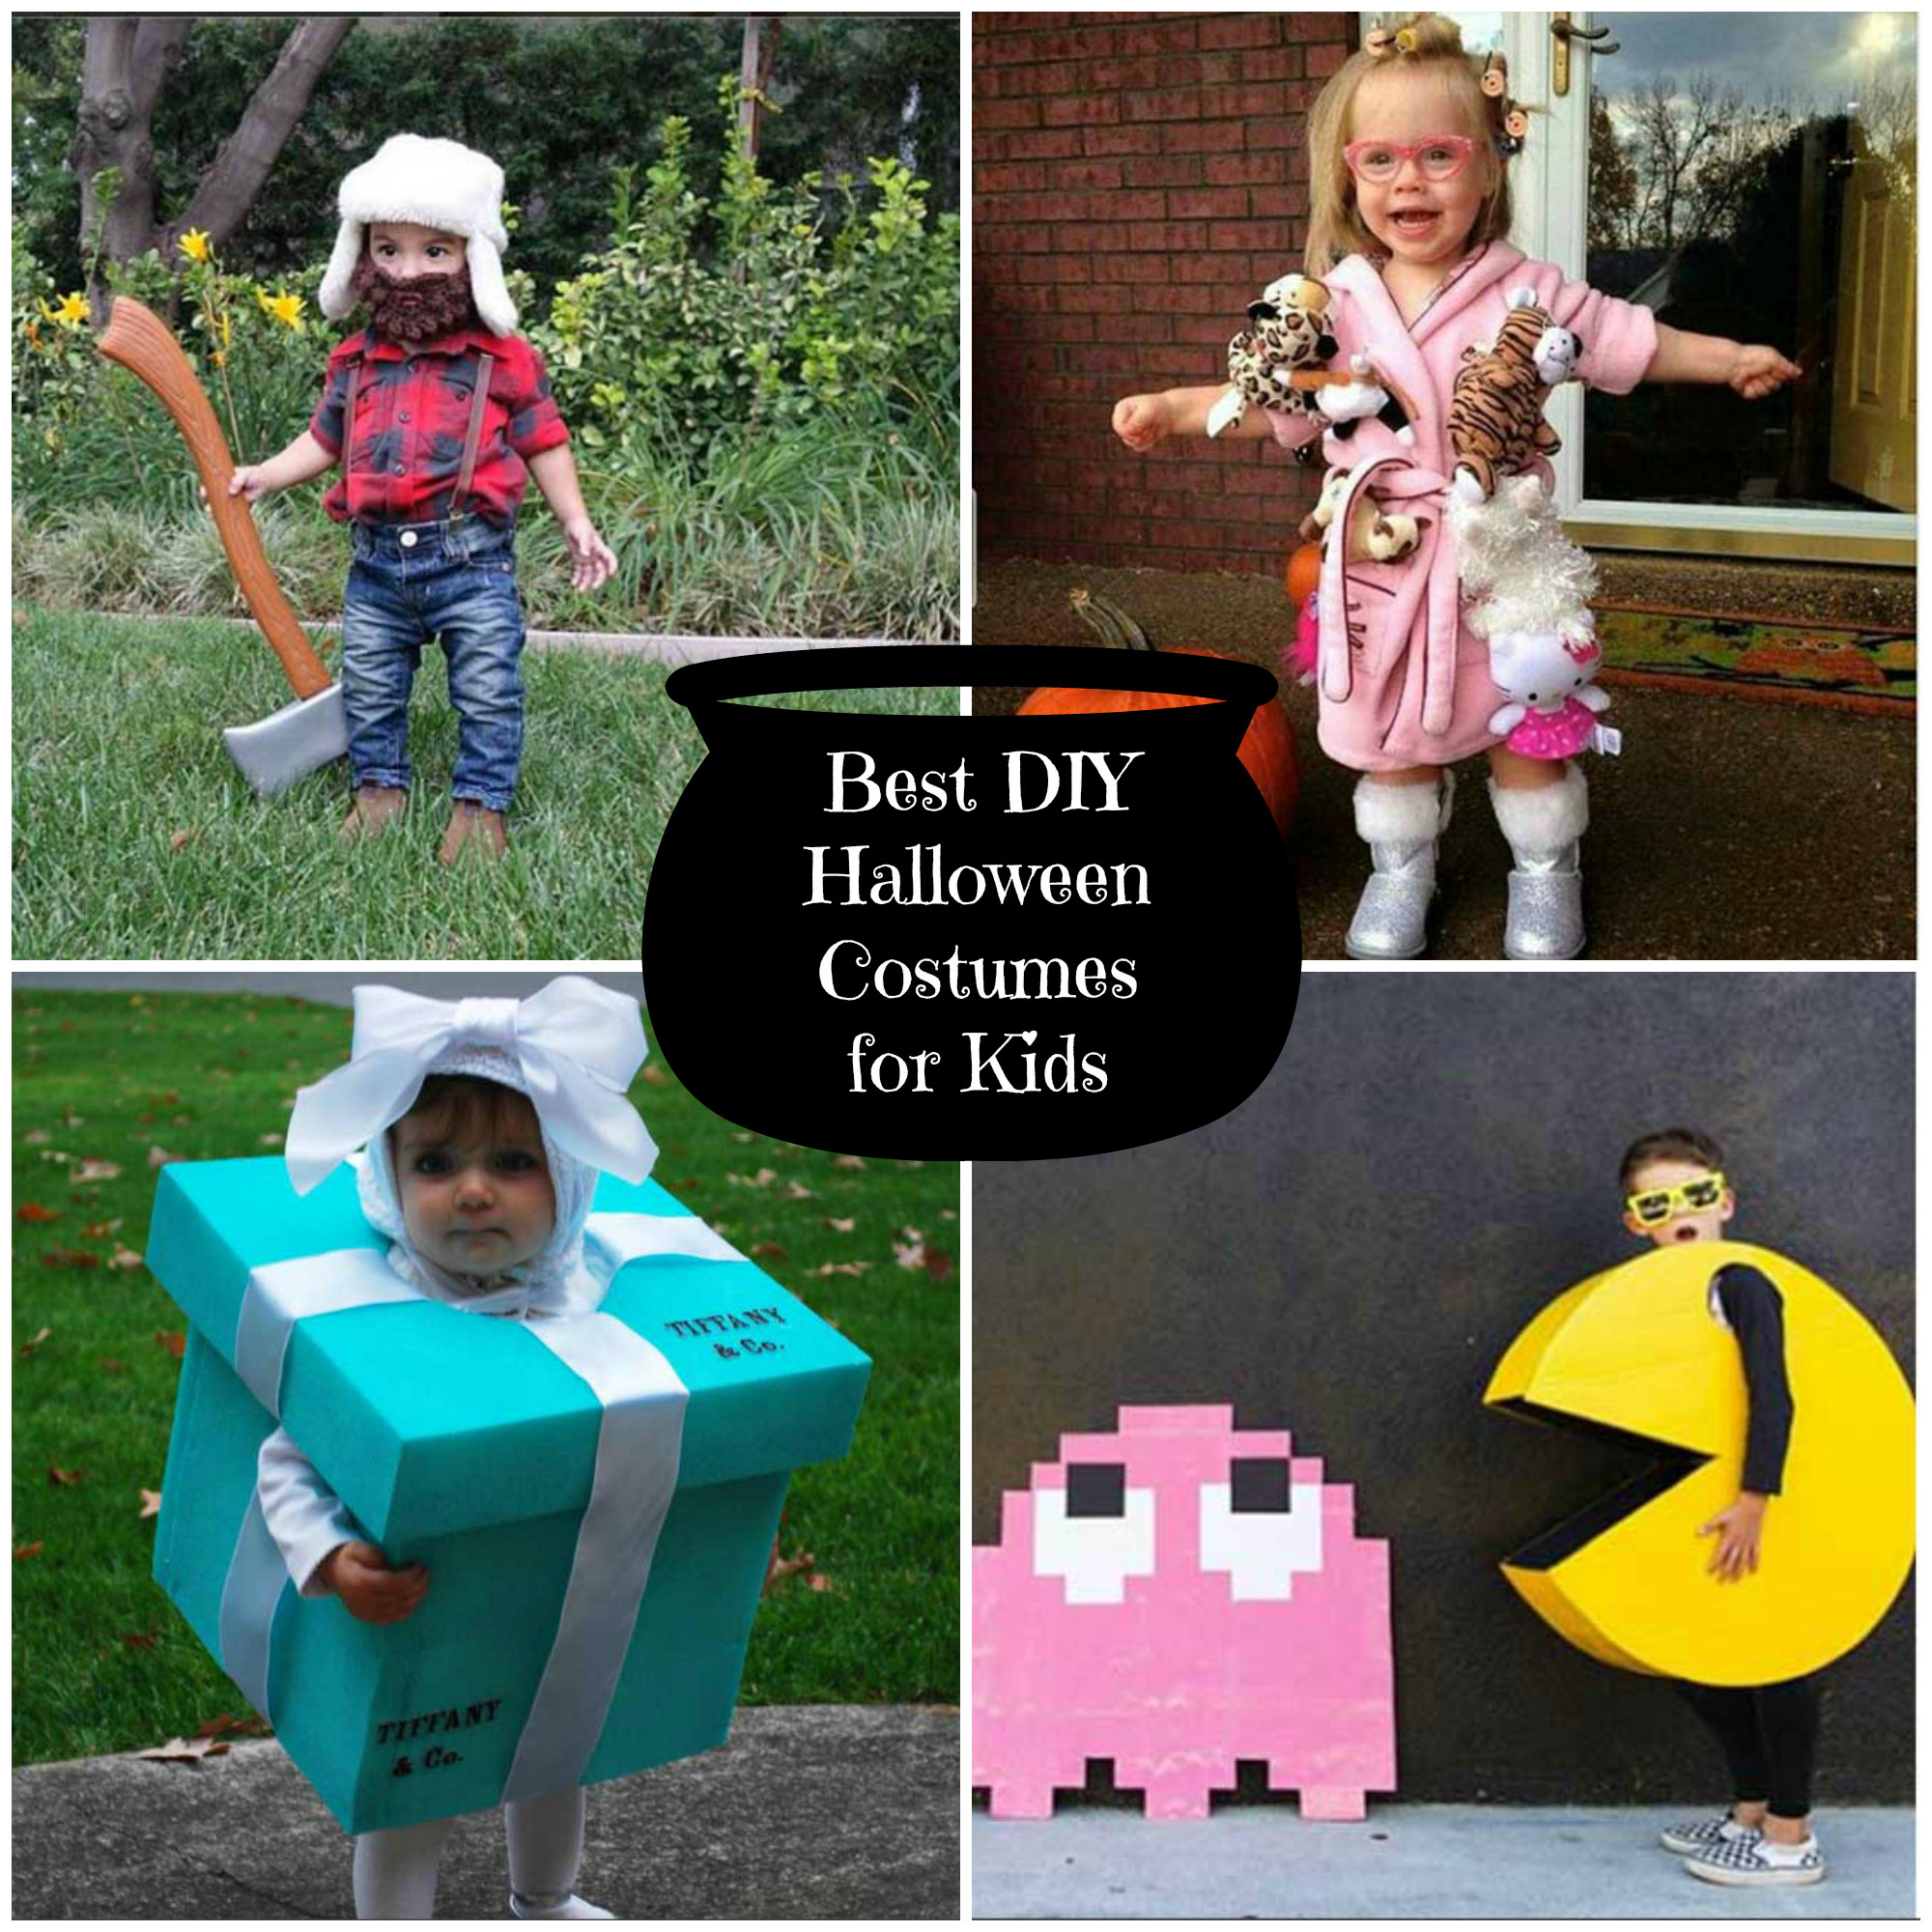 DIY Halloween Costume For Toddlers
 Best DIY Halloween Costumes for Kids Sometimes Homemade